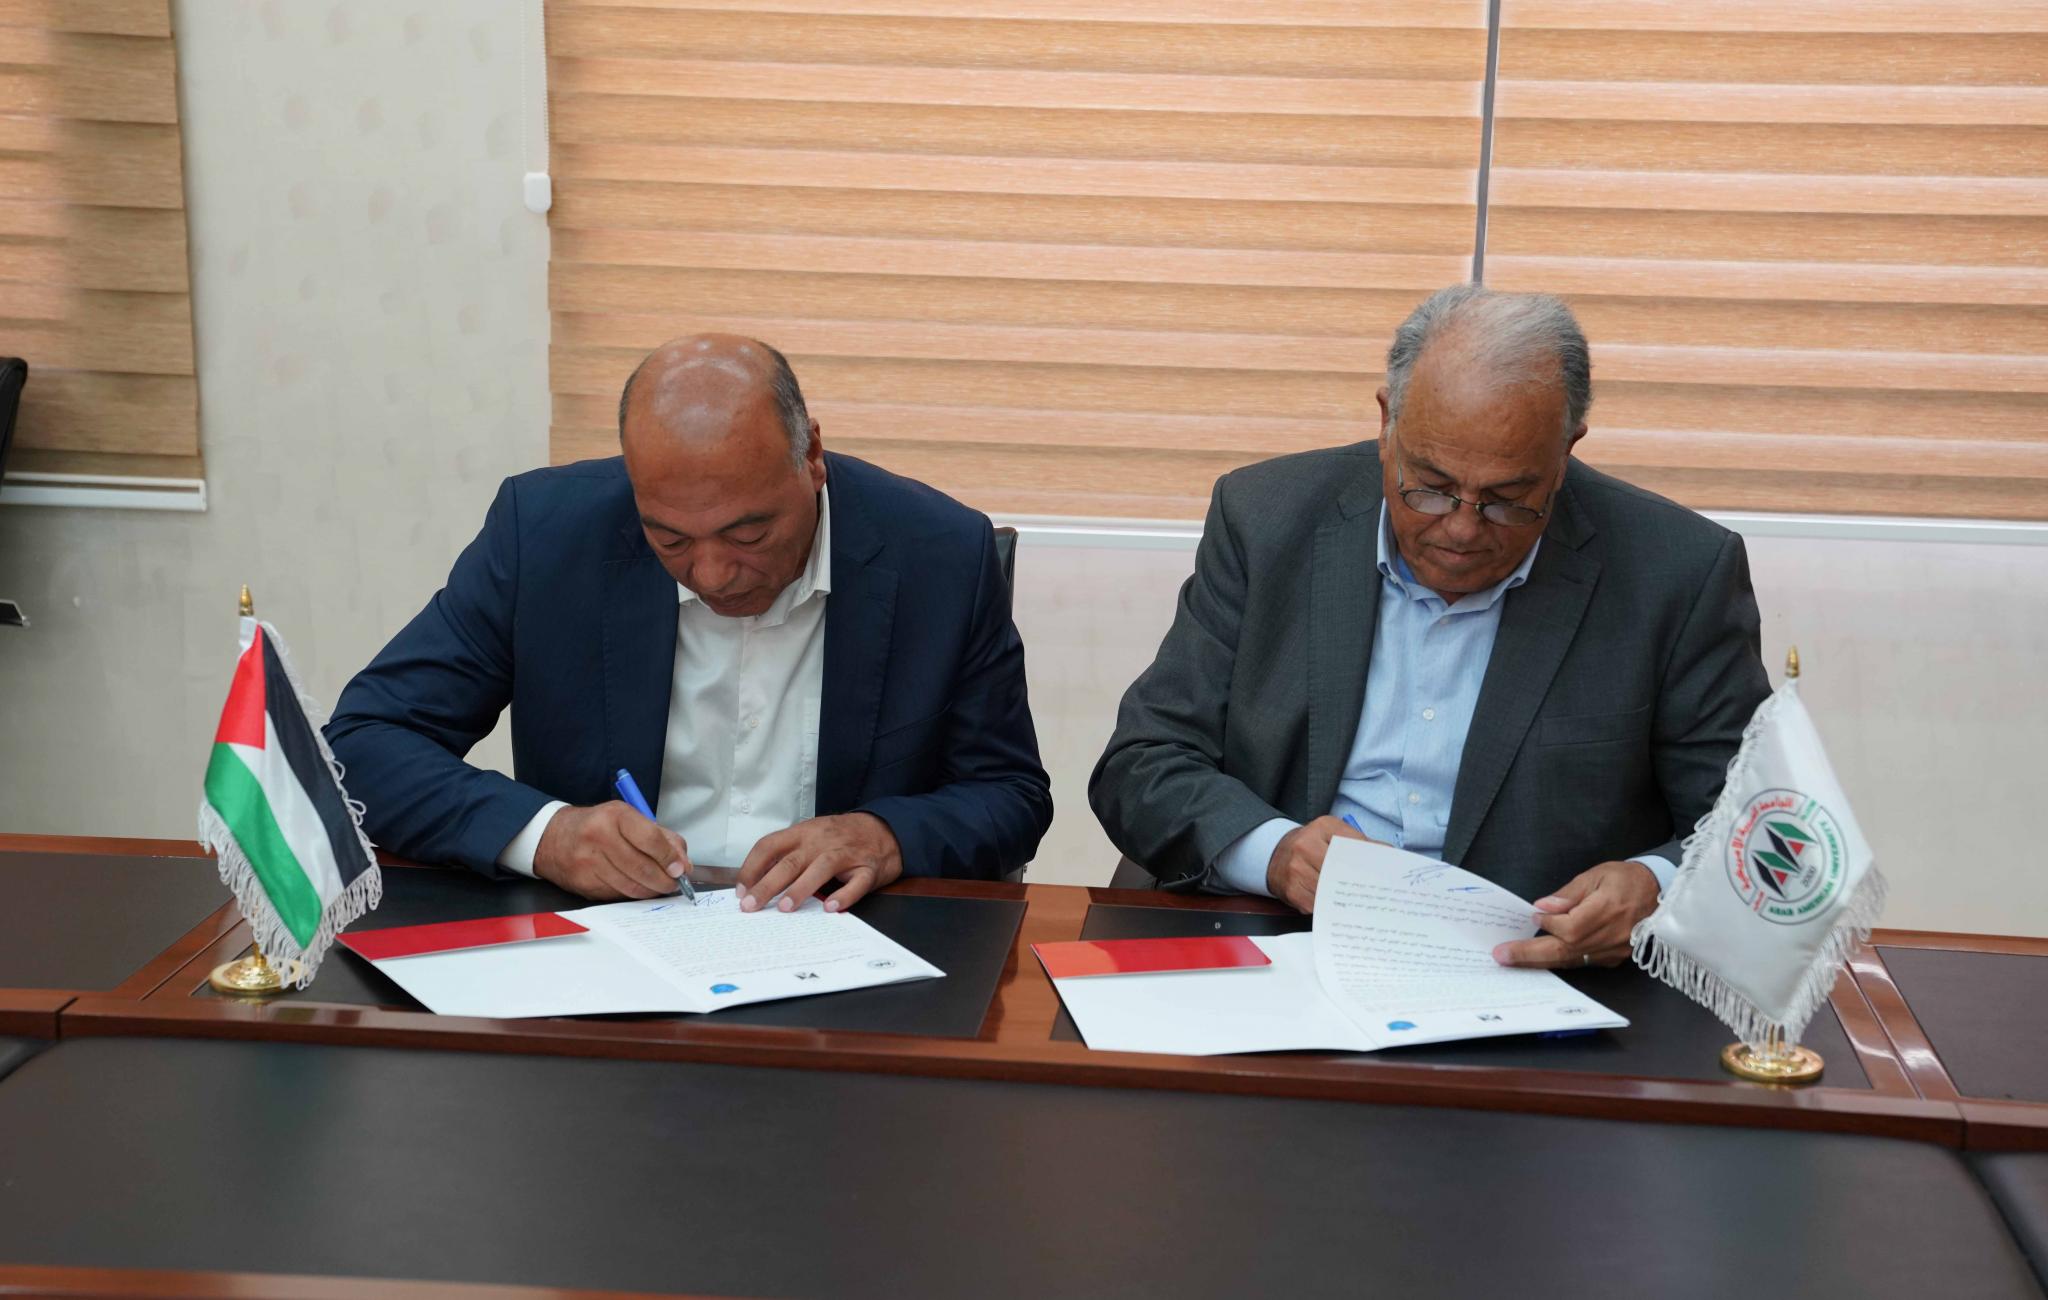 AAUP and the Palestinian Police Sign a Cooperation Agreement in Several Fields